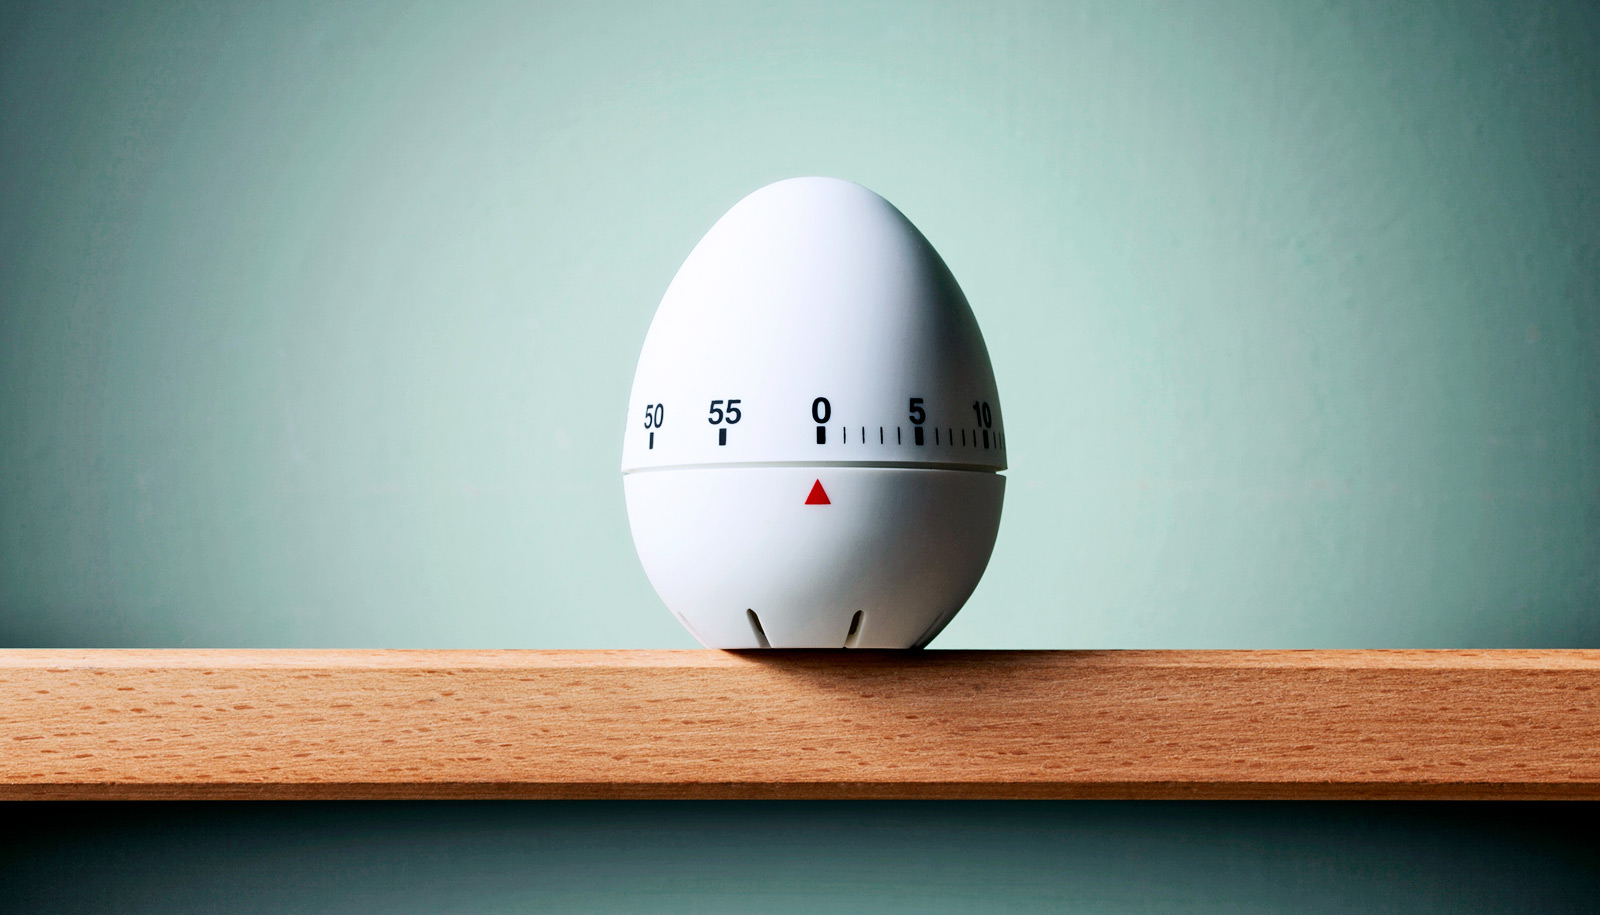 Sorry, You’re Not a Grown-Up If You Don’t Own at Least 13/25 of These Kitchen Things Egg Timer